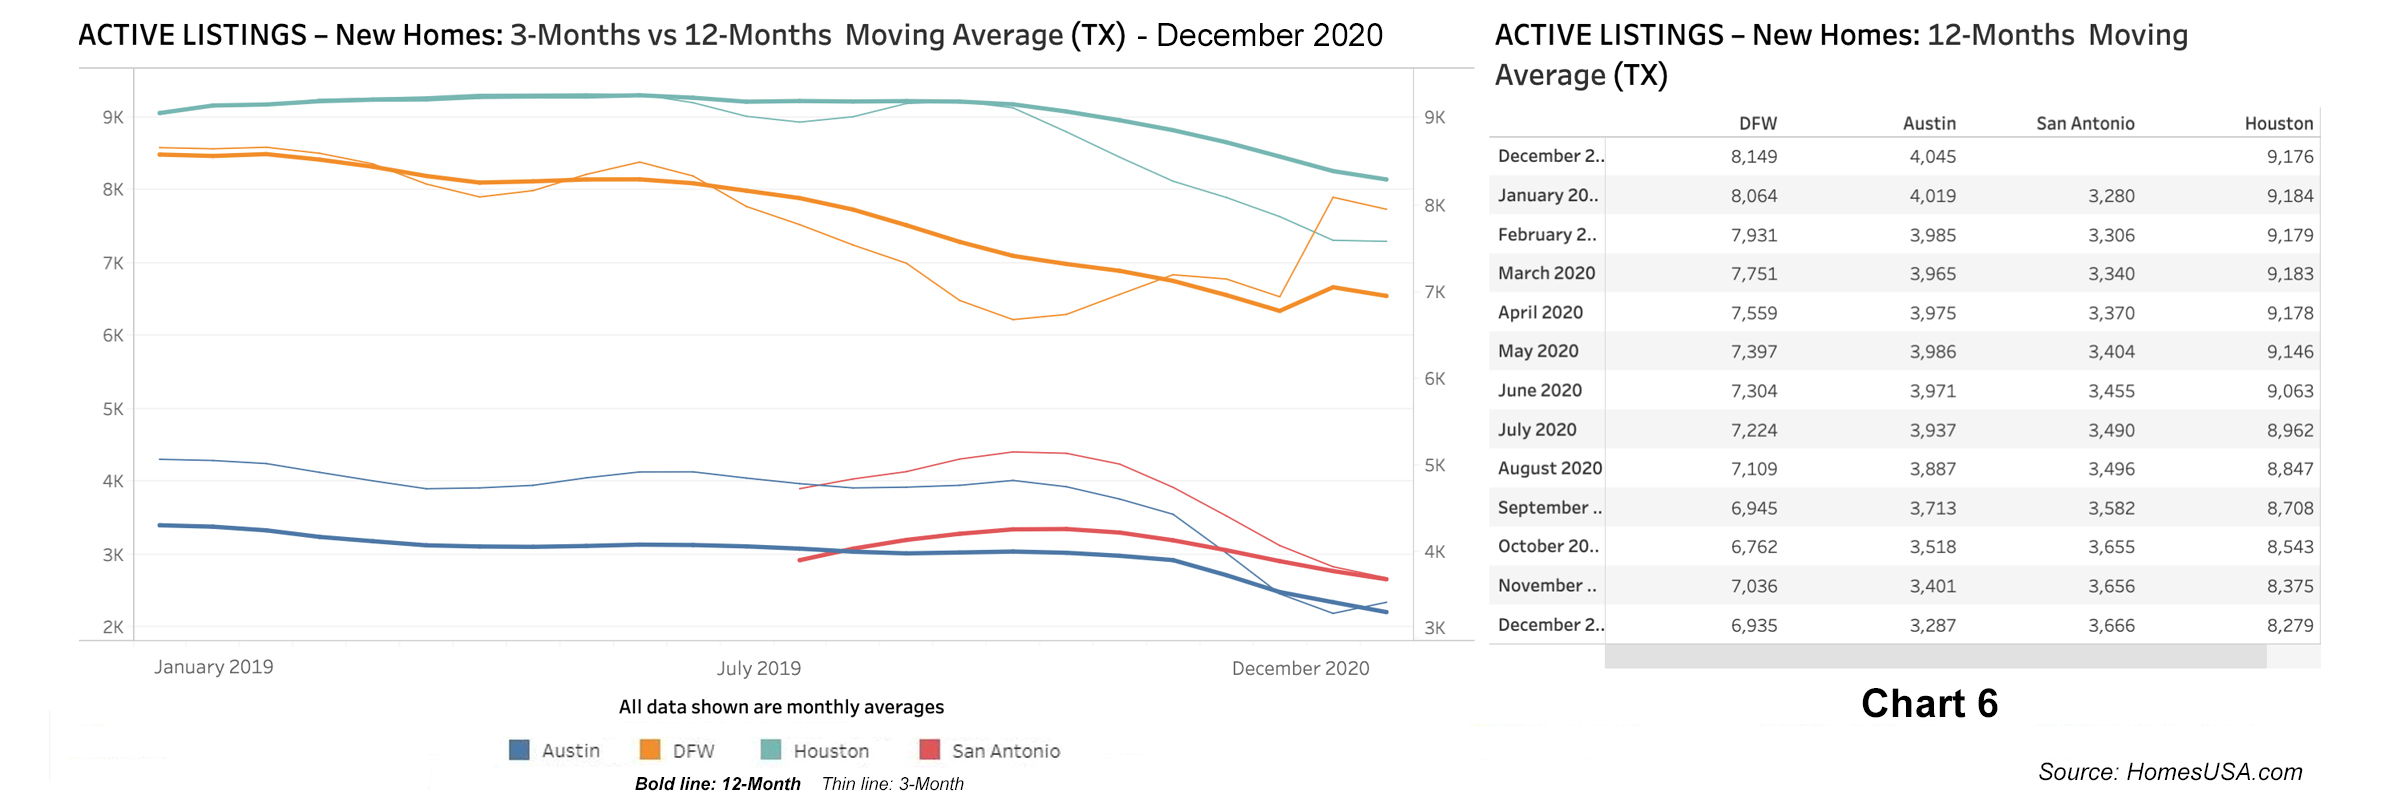 Chart 6: Active Listings for New Home Sales - December 2020